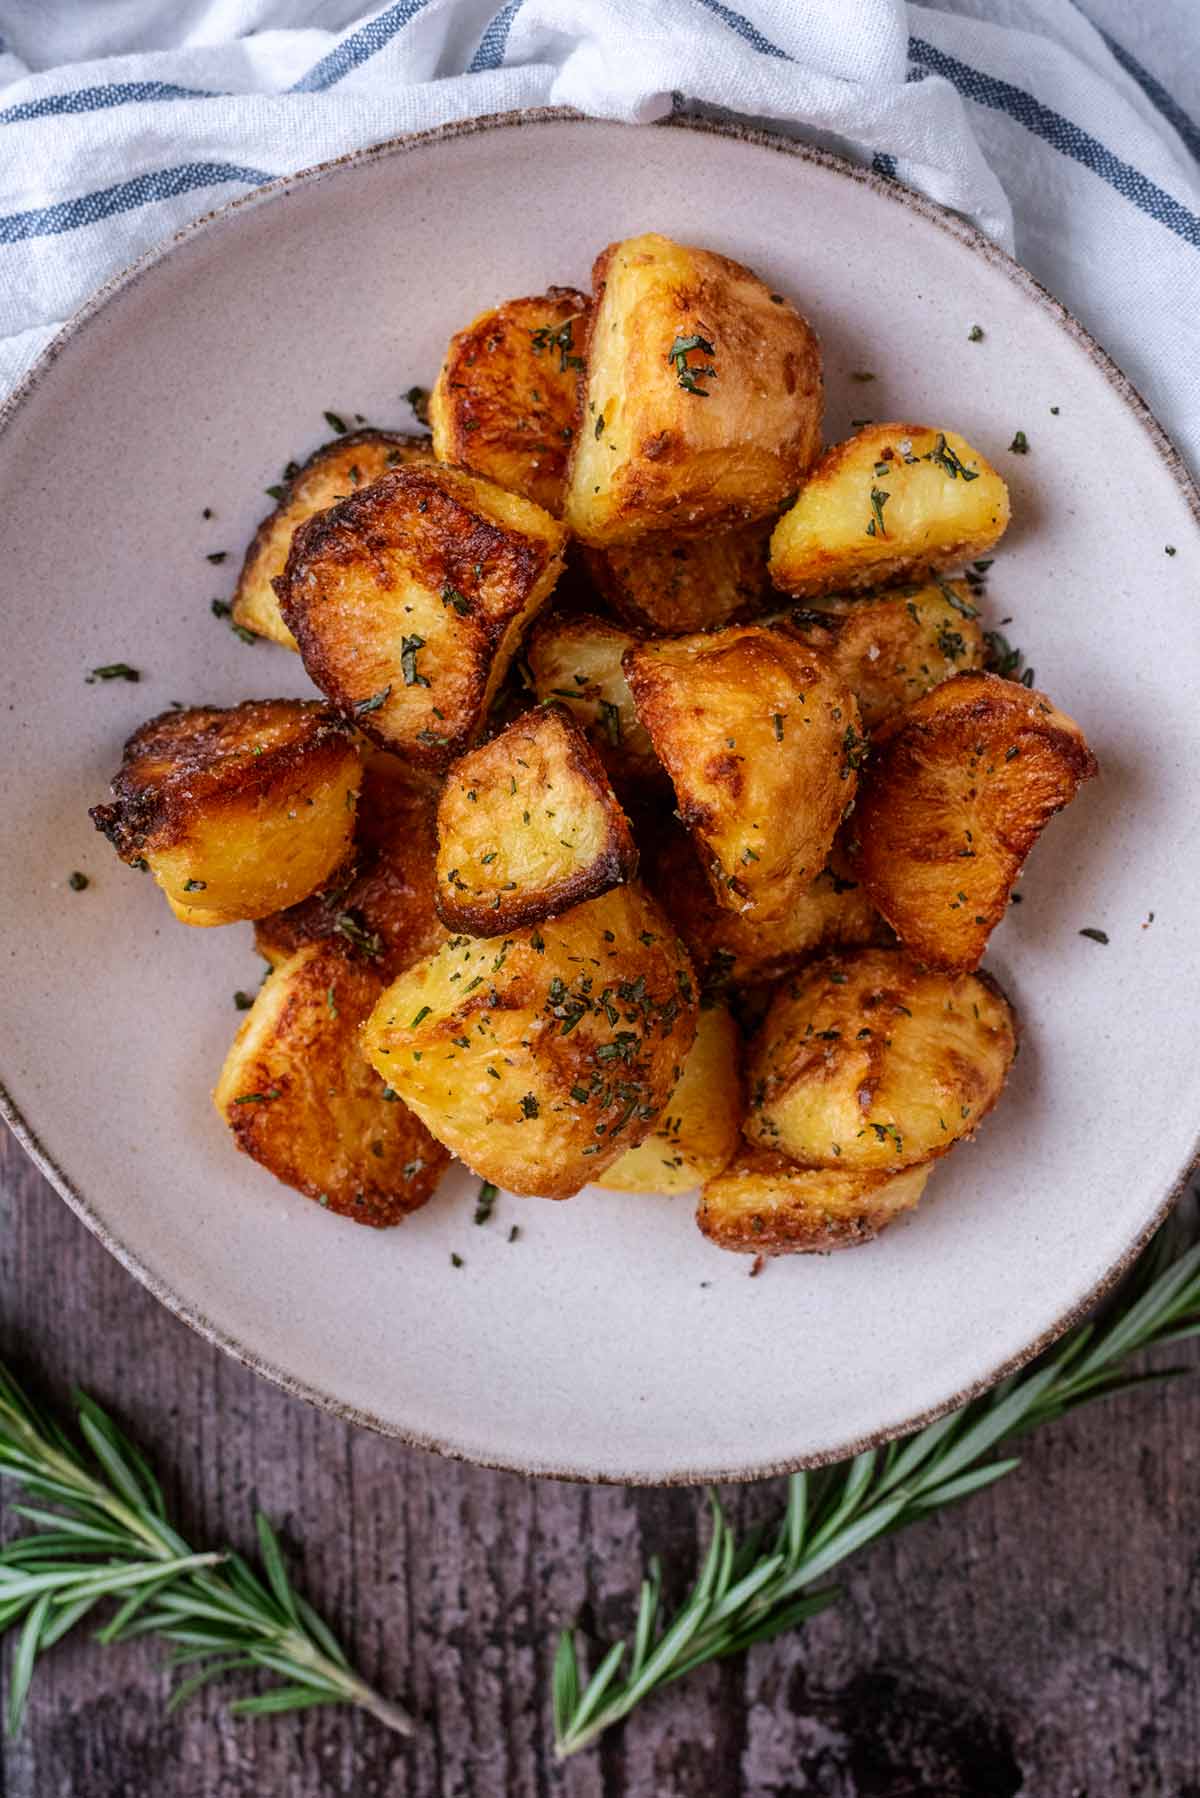 A bowl of roast potatoes next to a striped towel and some sprigs of rosemary.